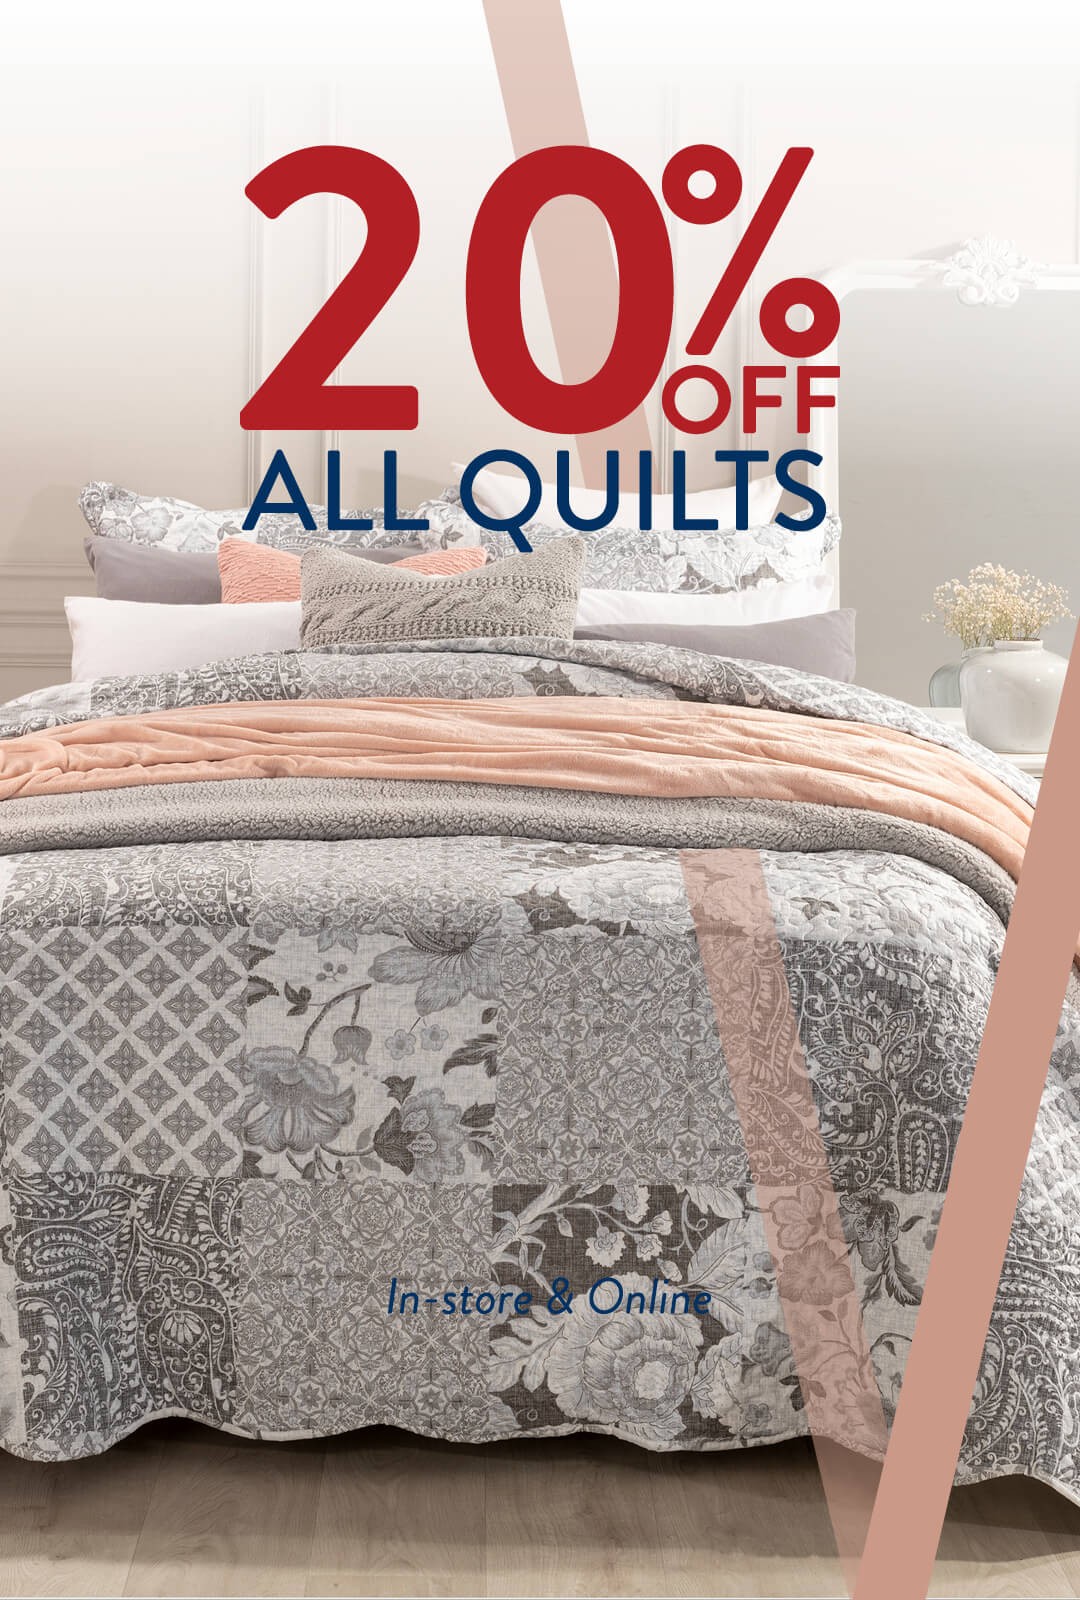 20% quilts